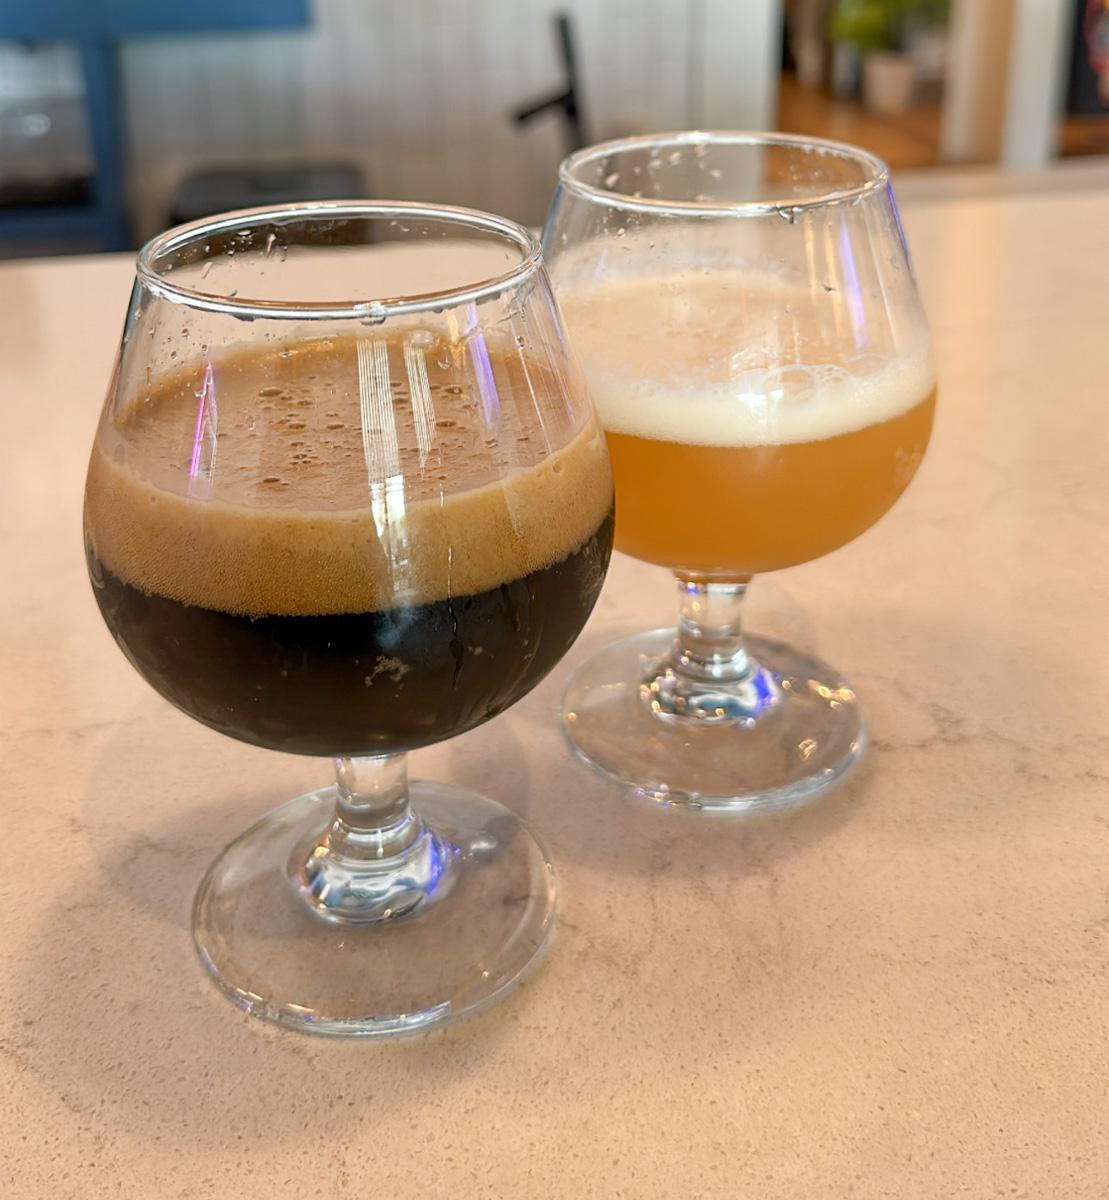 Equilibrium Brewery on Tap at The Really Good Beer Stop | ViewFromALove